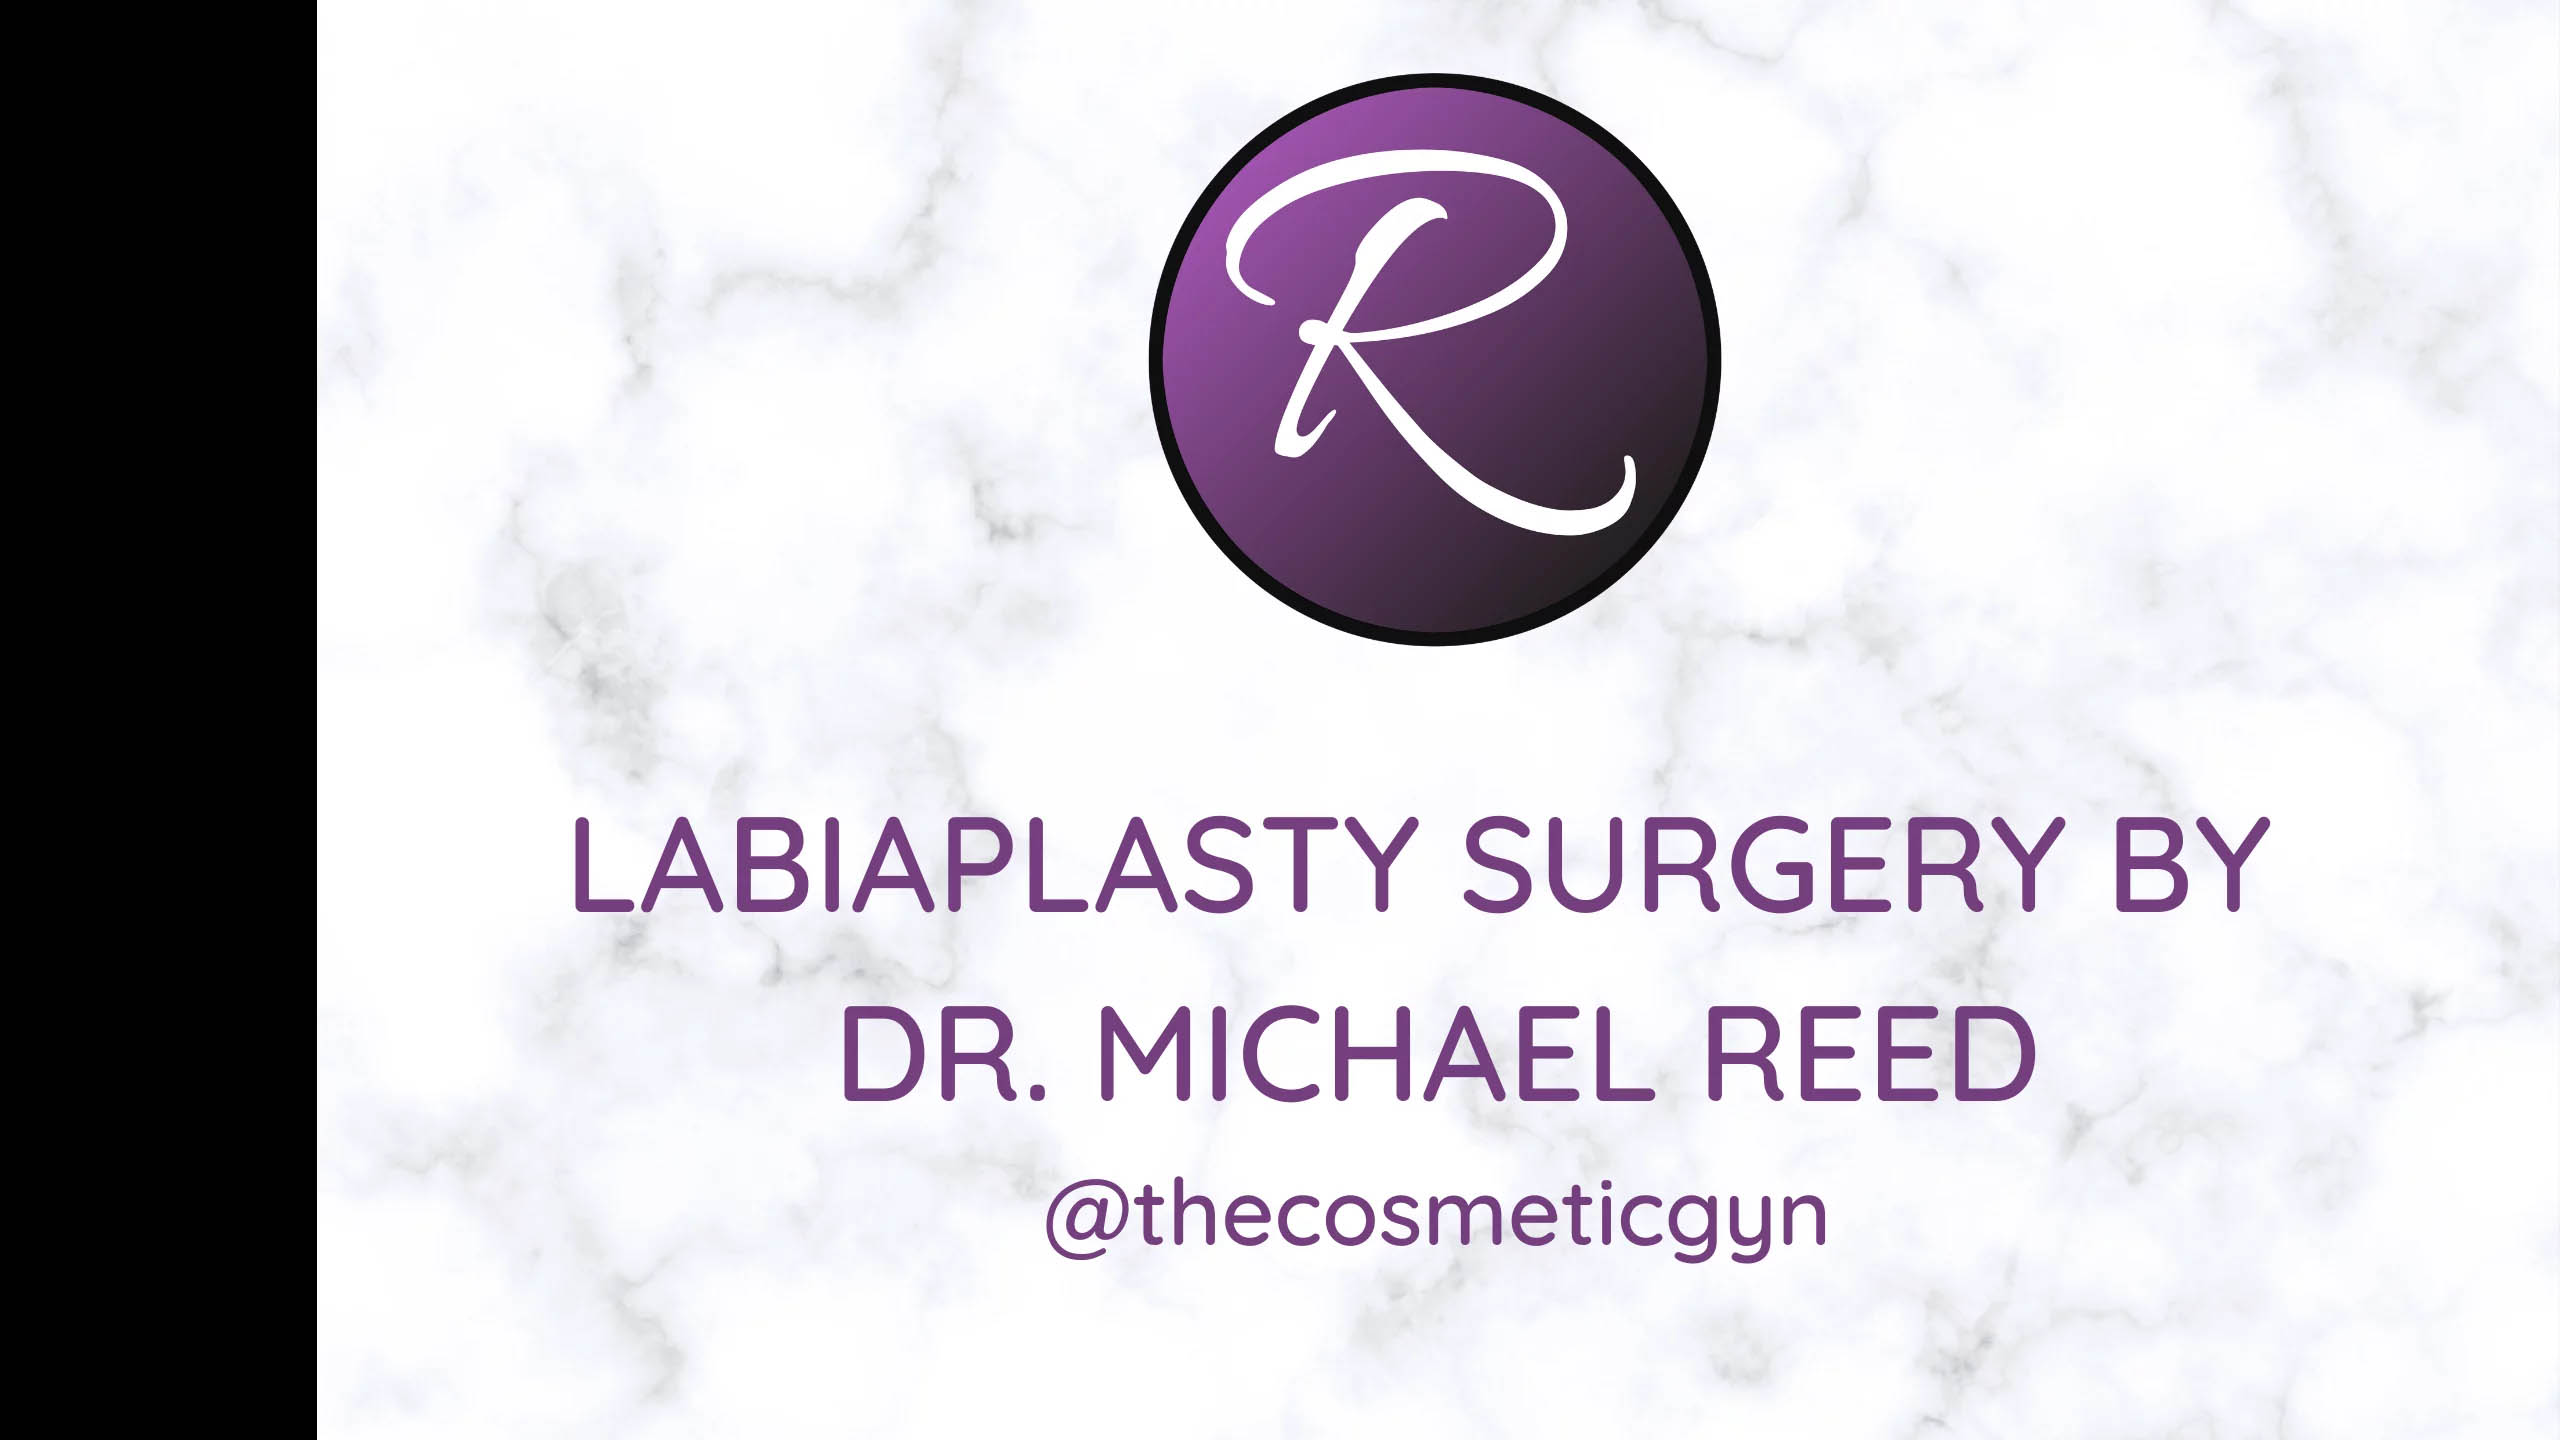 Labiaplasty Surgery by Dr. Michael Reed